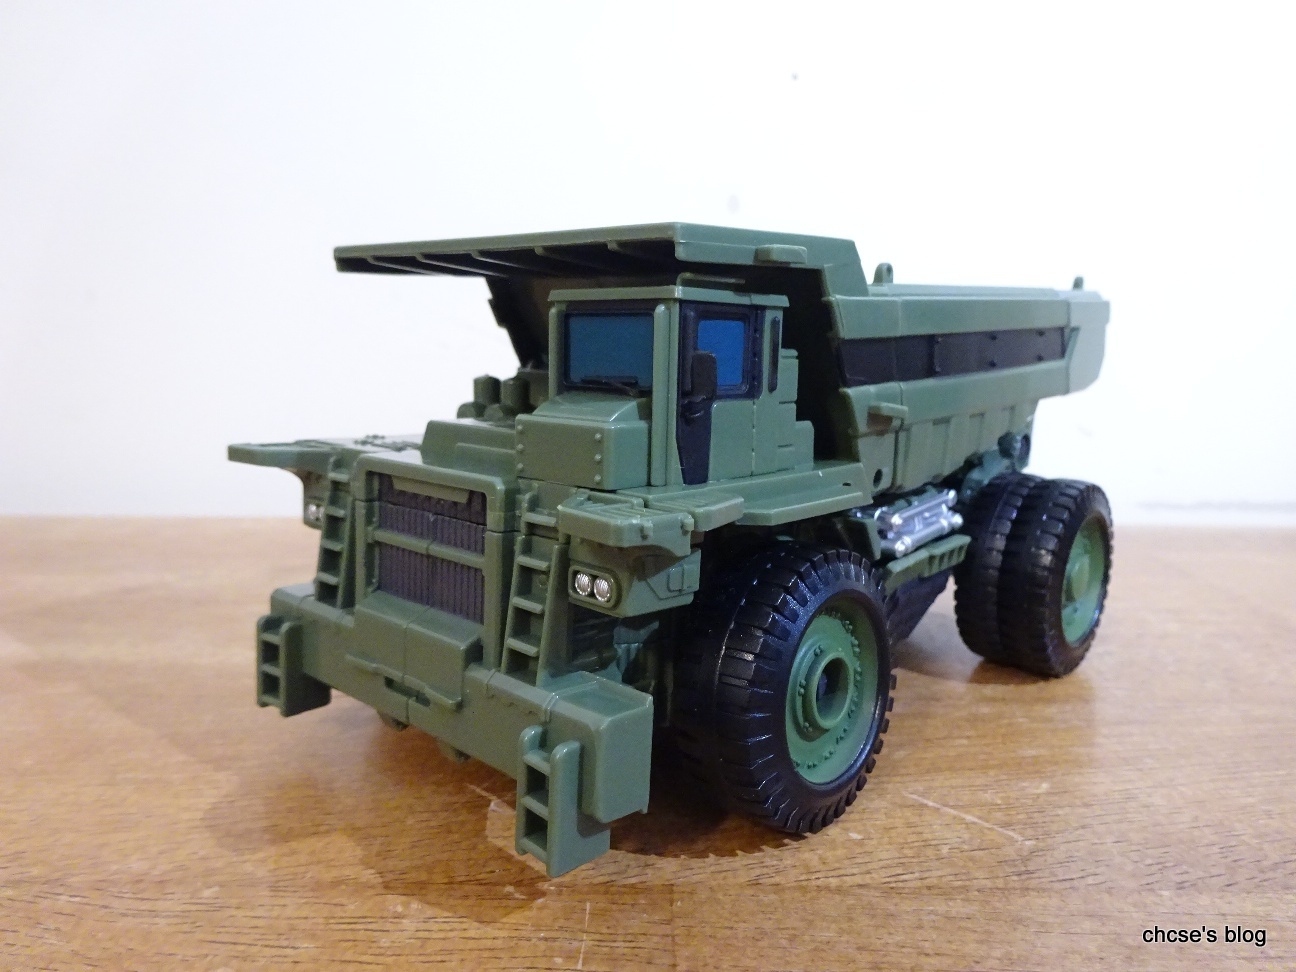 ChCse's blog: Toy Review: Transformers Generations Studio Series